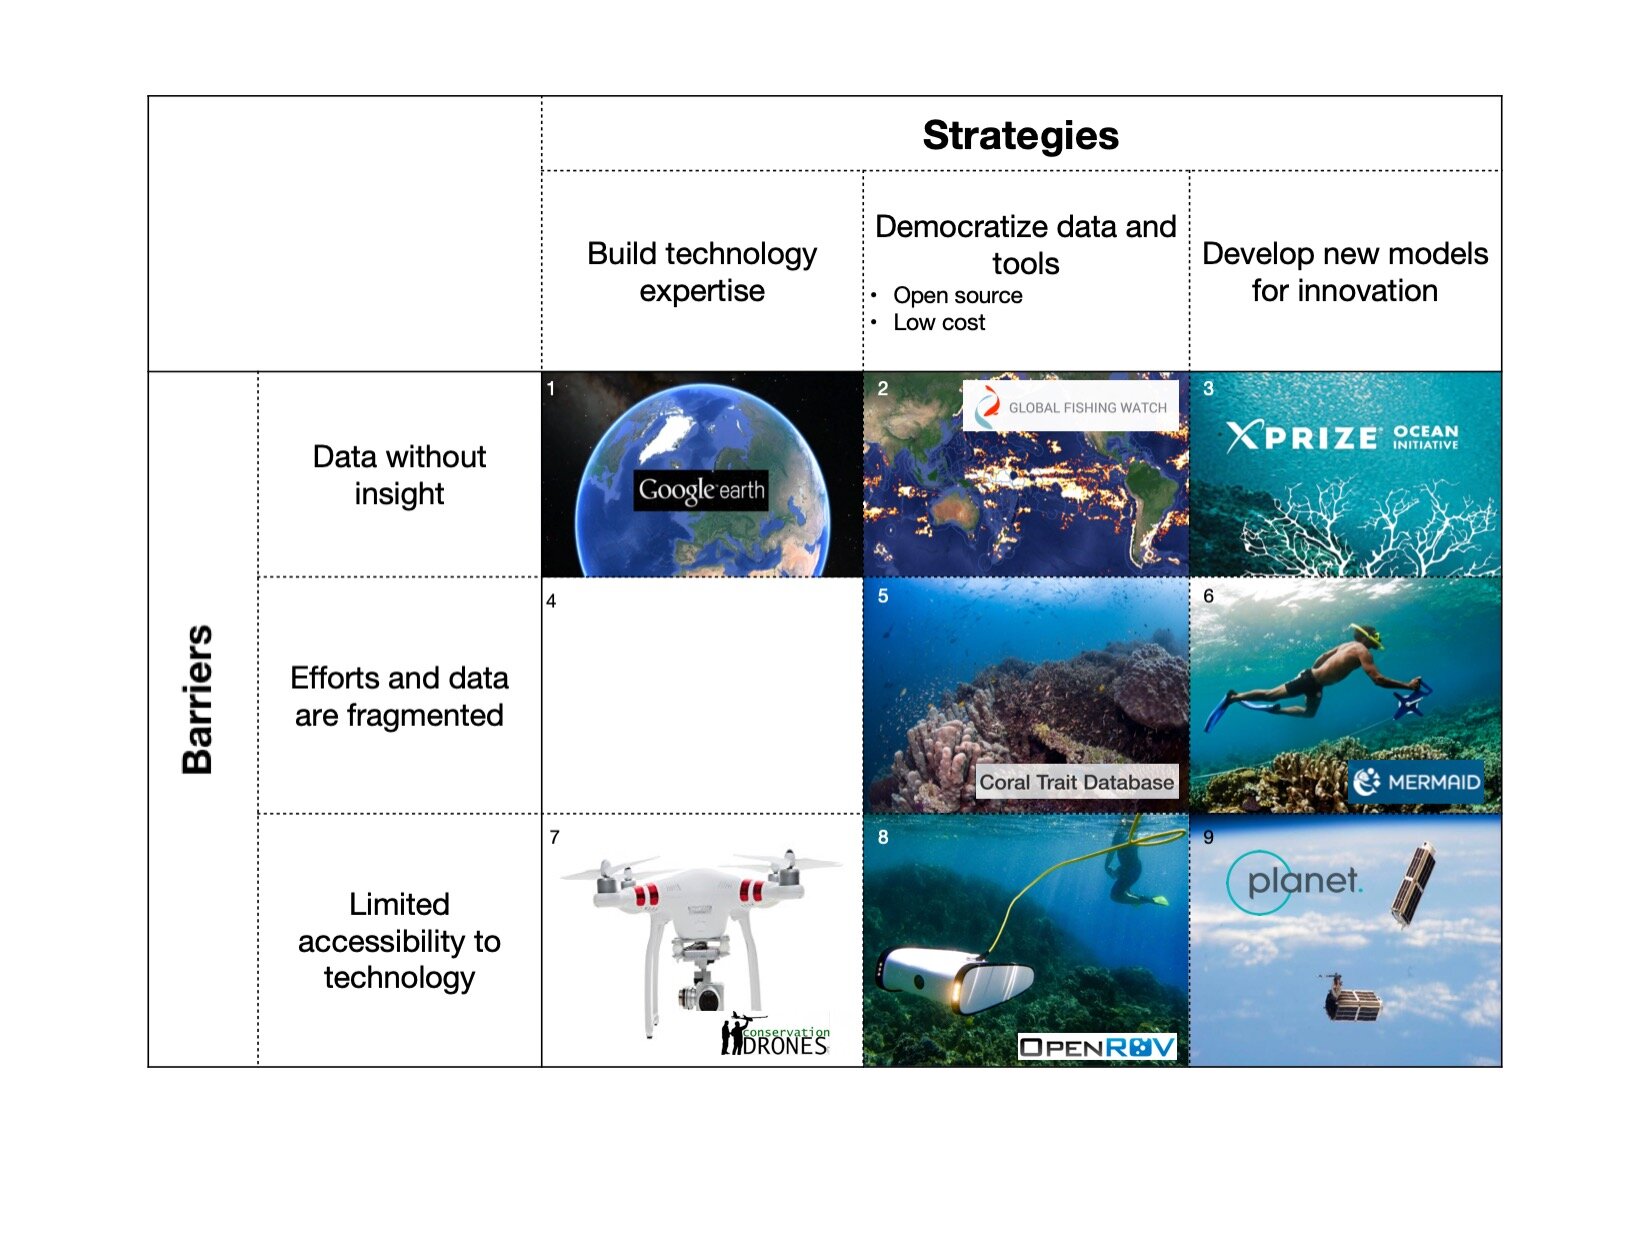  Matrix of illustrative coral reef science and conservation technology solutions that match innovative strategies to known barriers. 